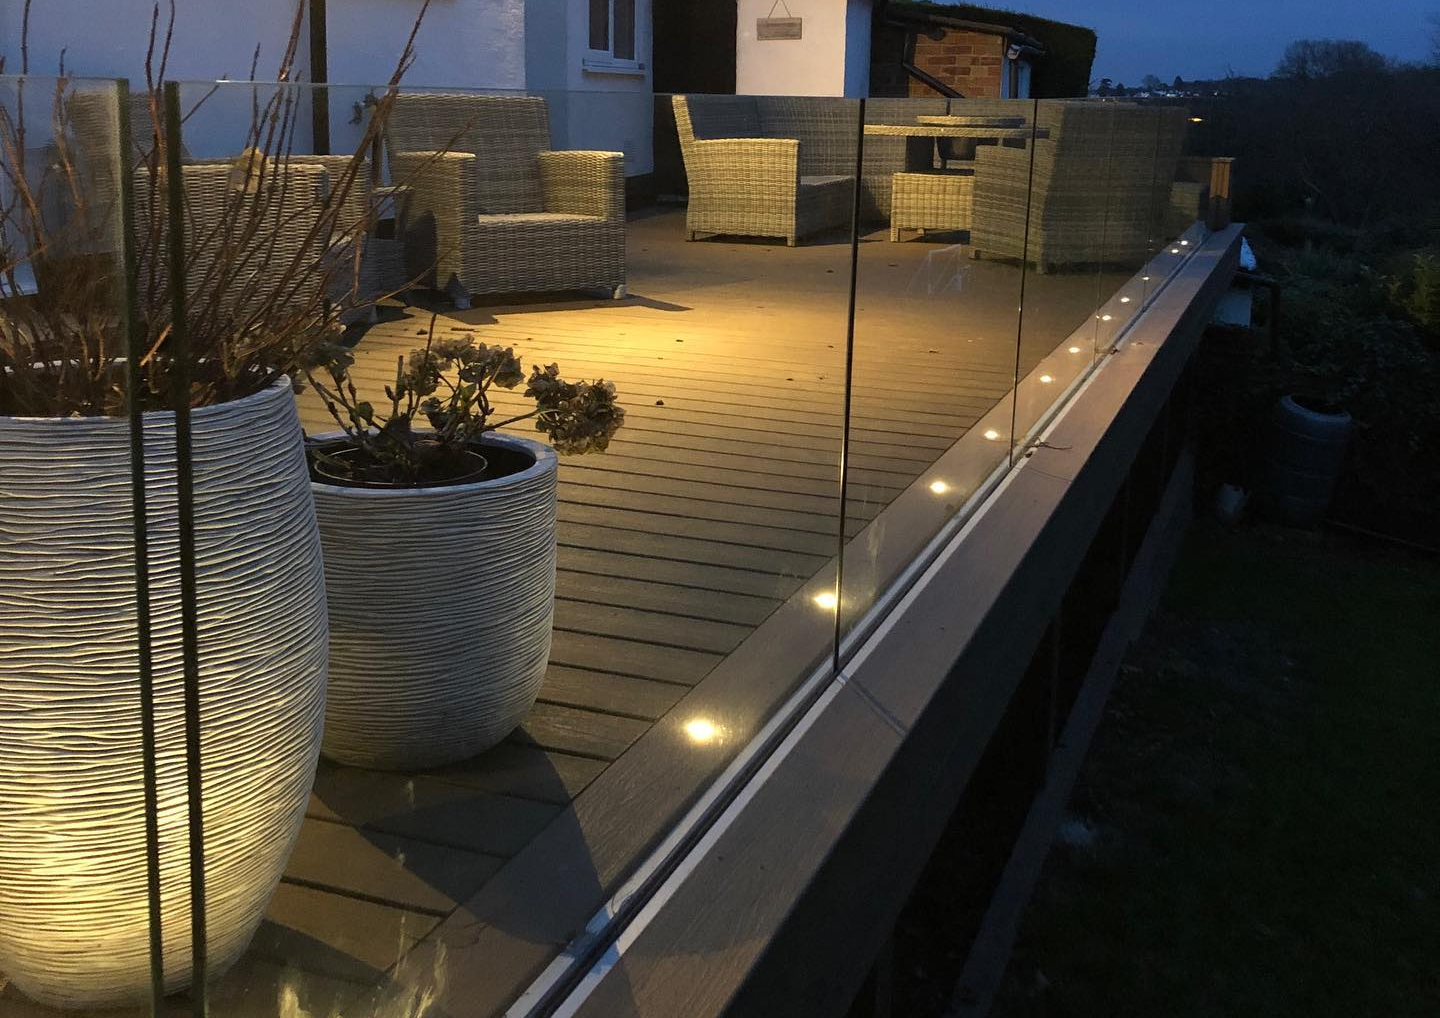 Handrails installed with decking and spotlights